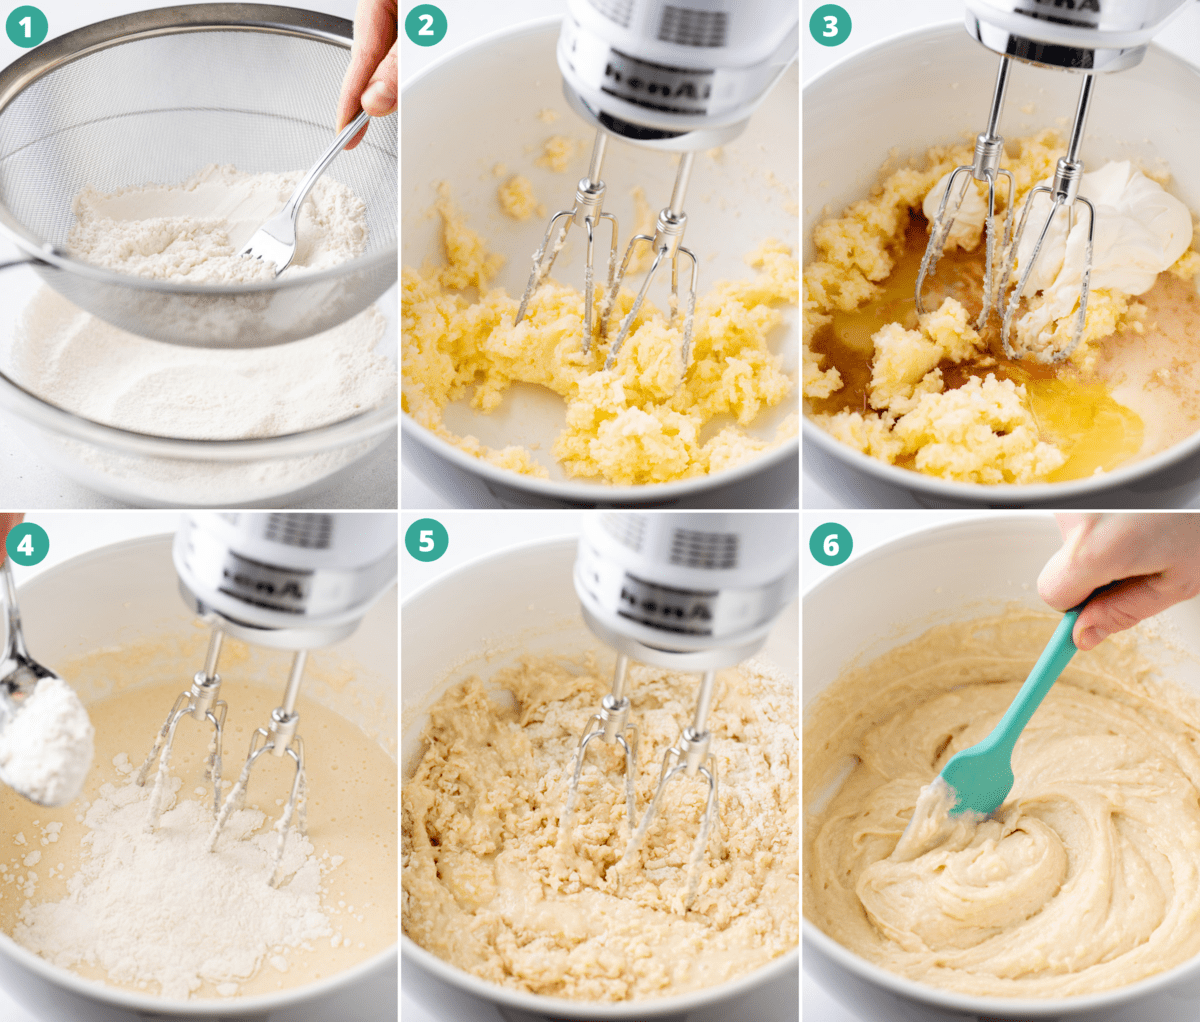 Step-by-step photos showing process of making gluten-free cupcake batter